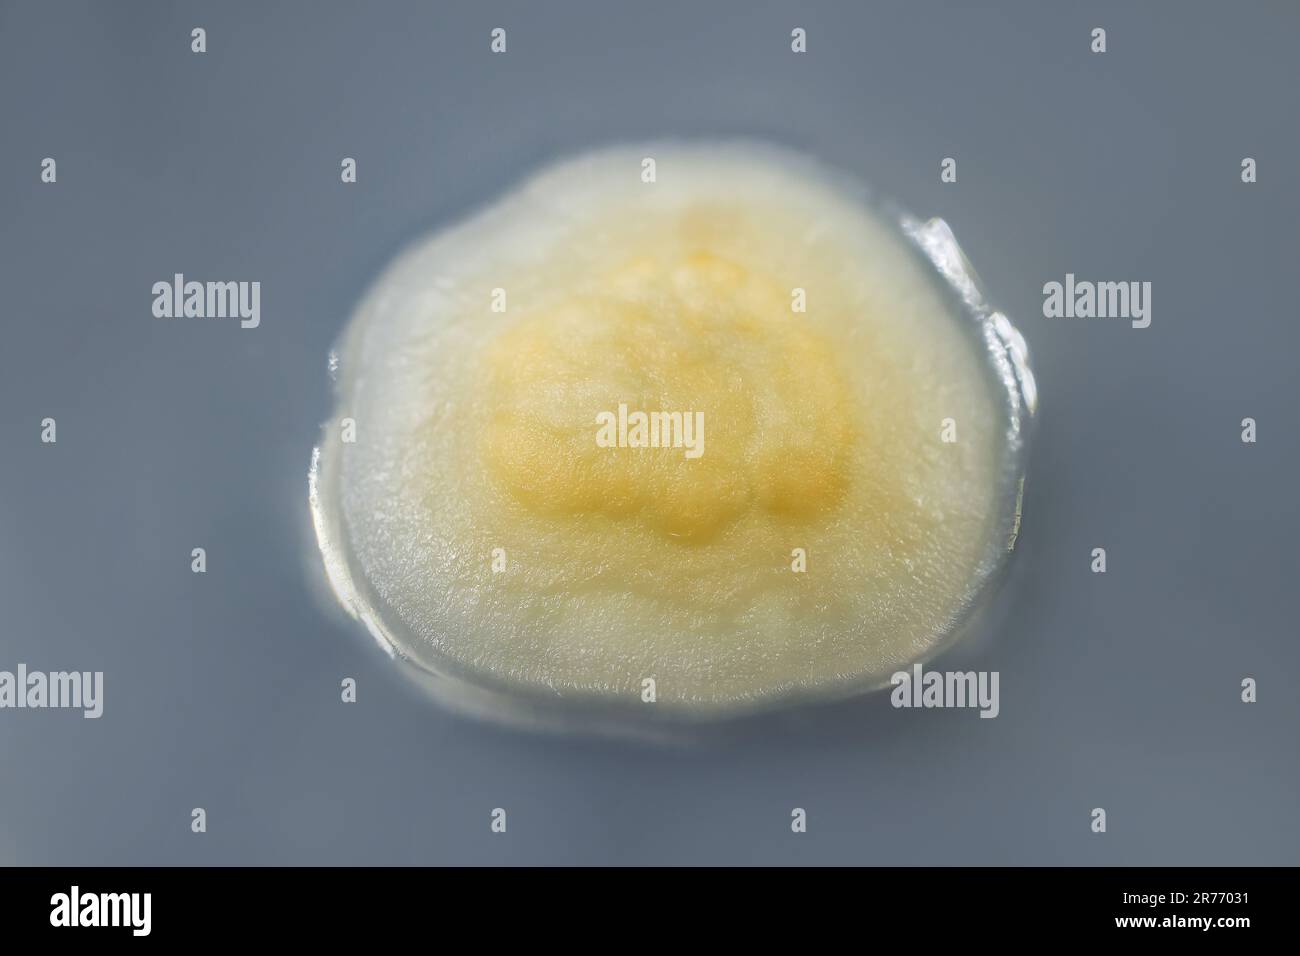 Colony of a mold fungus cultivated from indoor air on Sabourad dextrose agar. Stock Photo